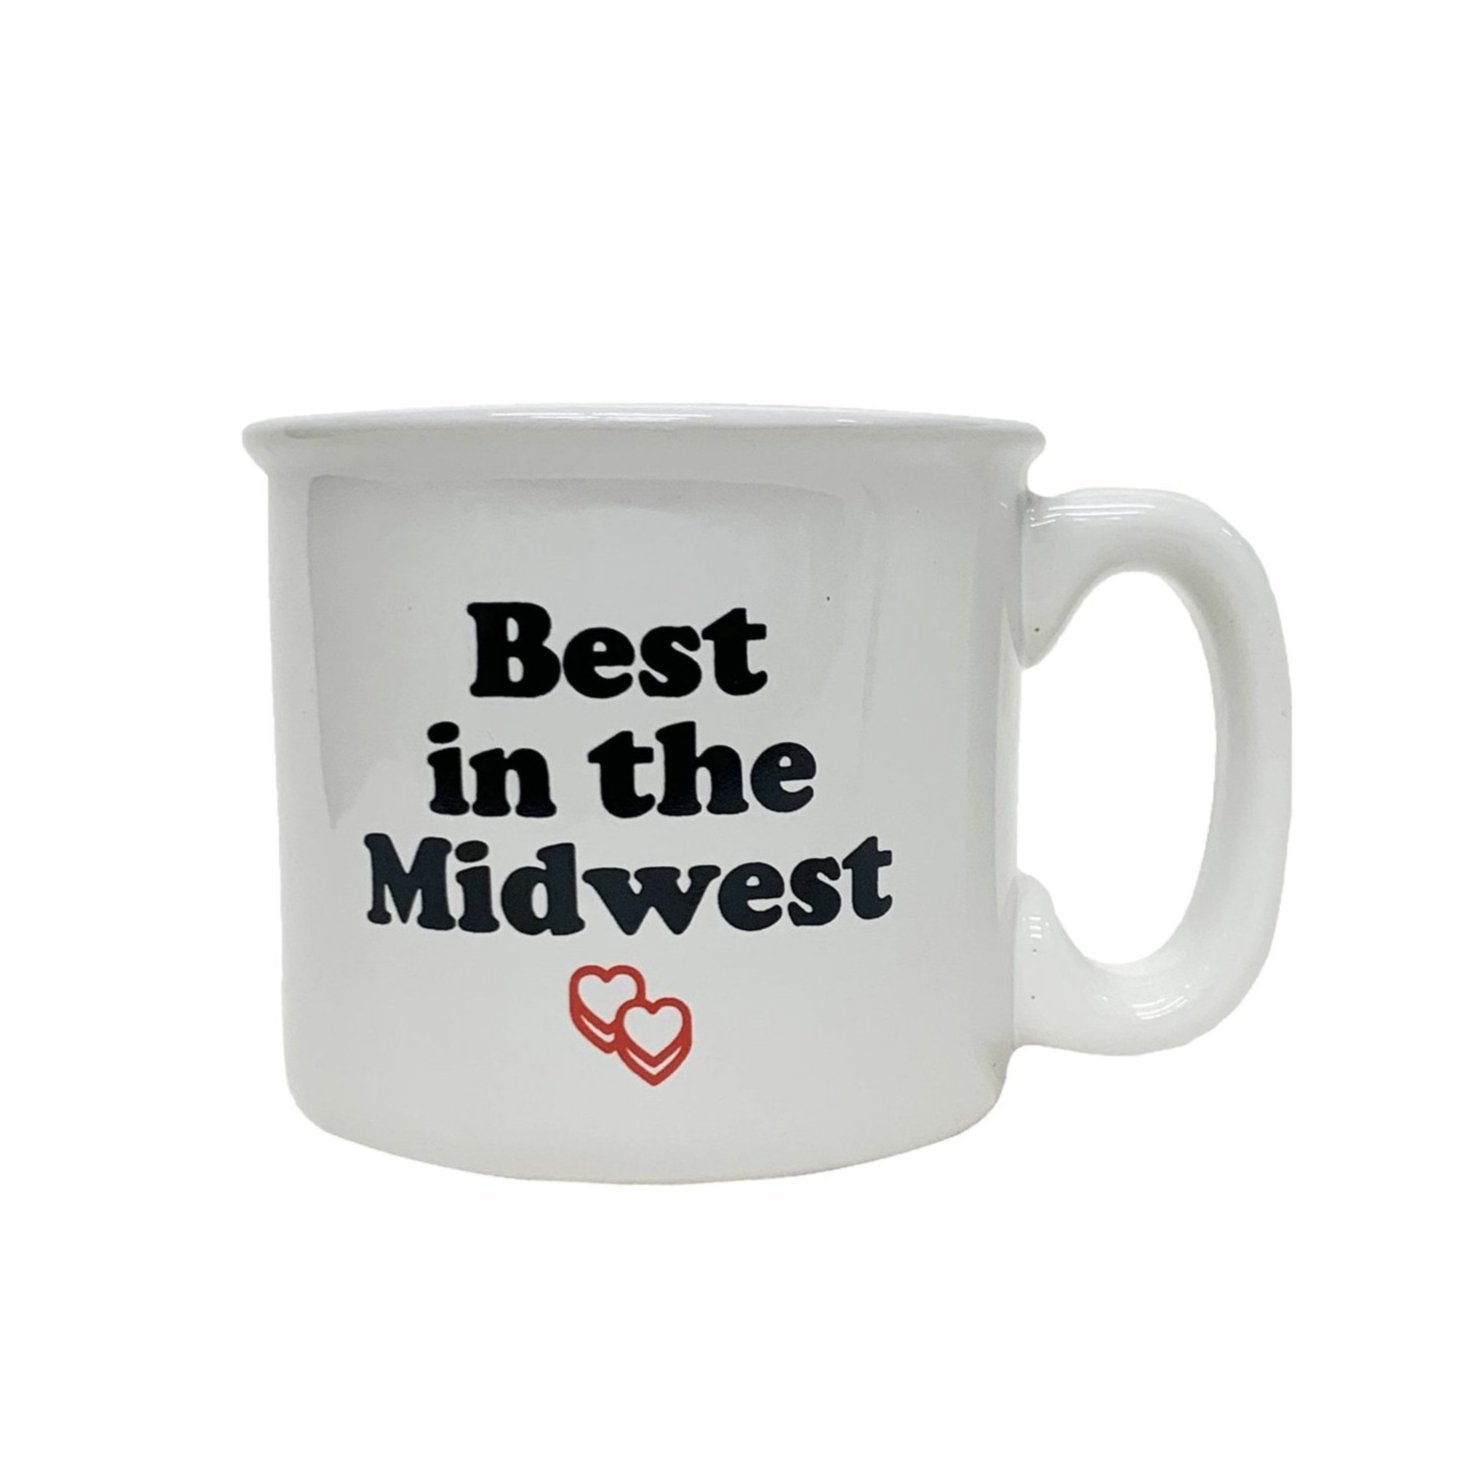 Best in the Midwest Campfire Mug (Discontinued)